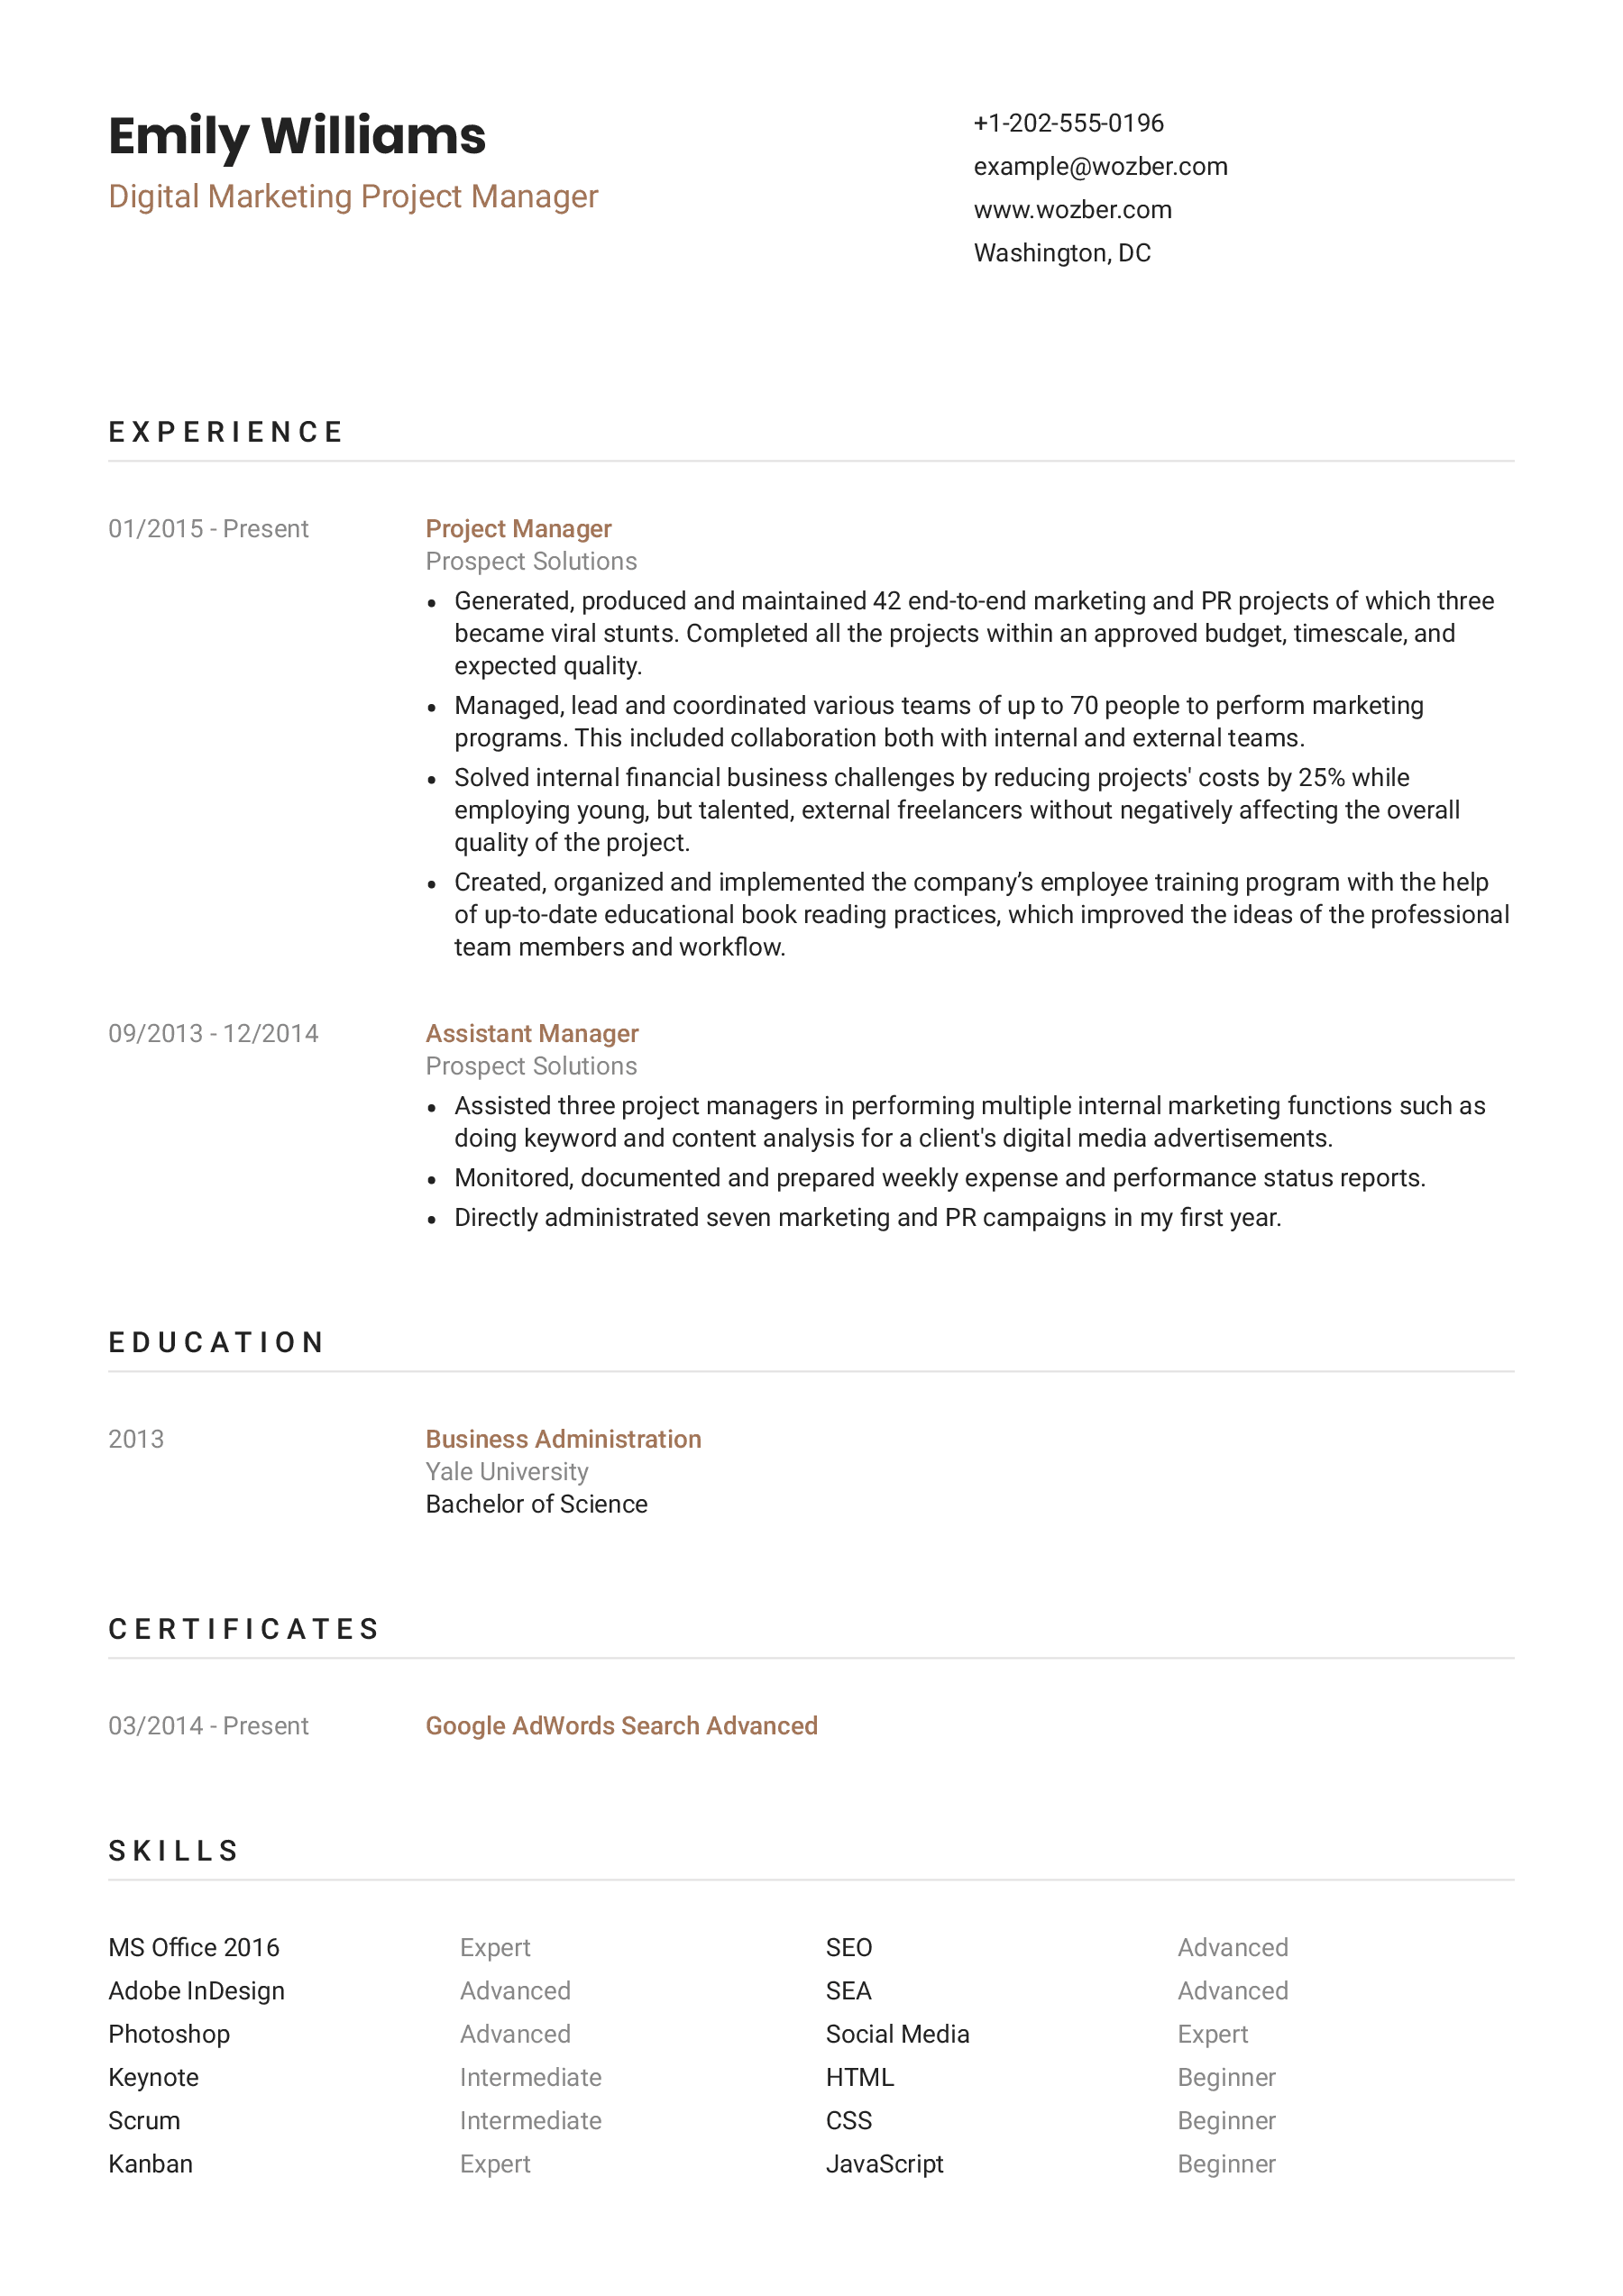 An ATS-friendly CV template with a classic, clean design.